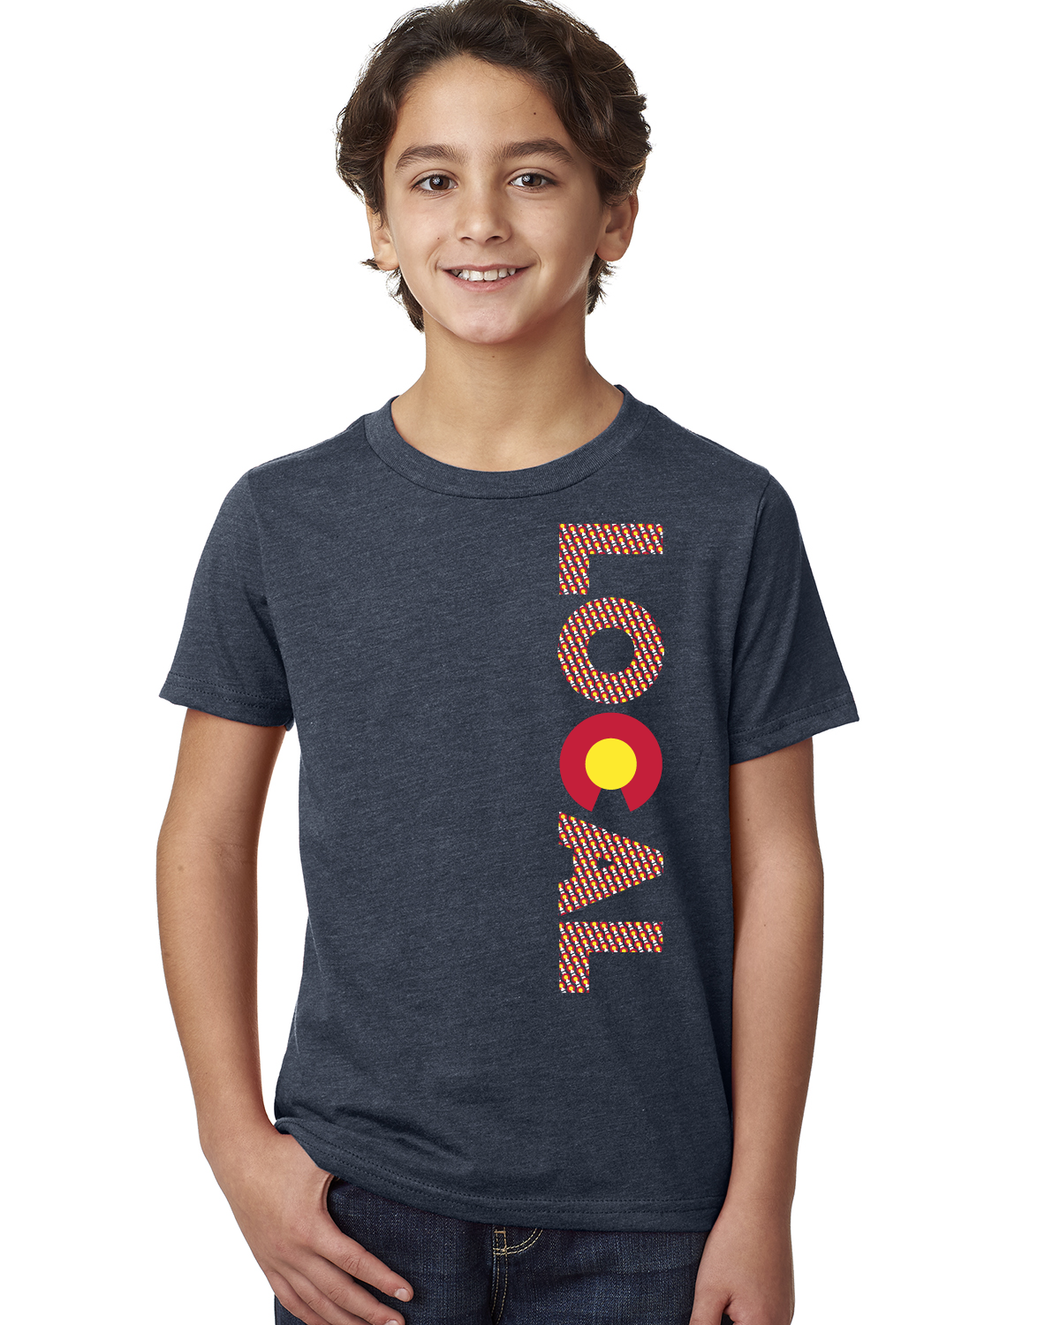 Local -Youth T-shirt